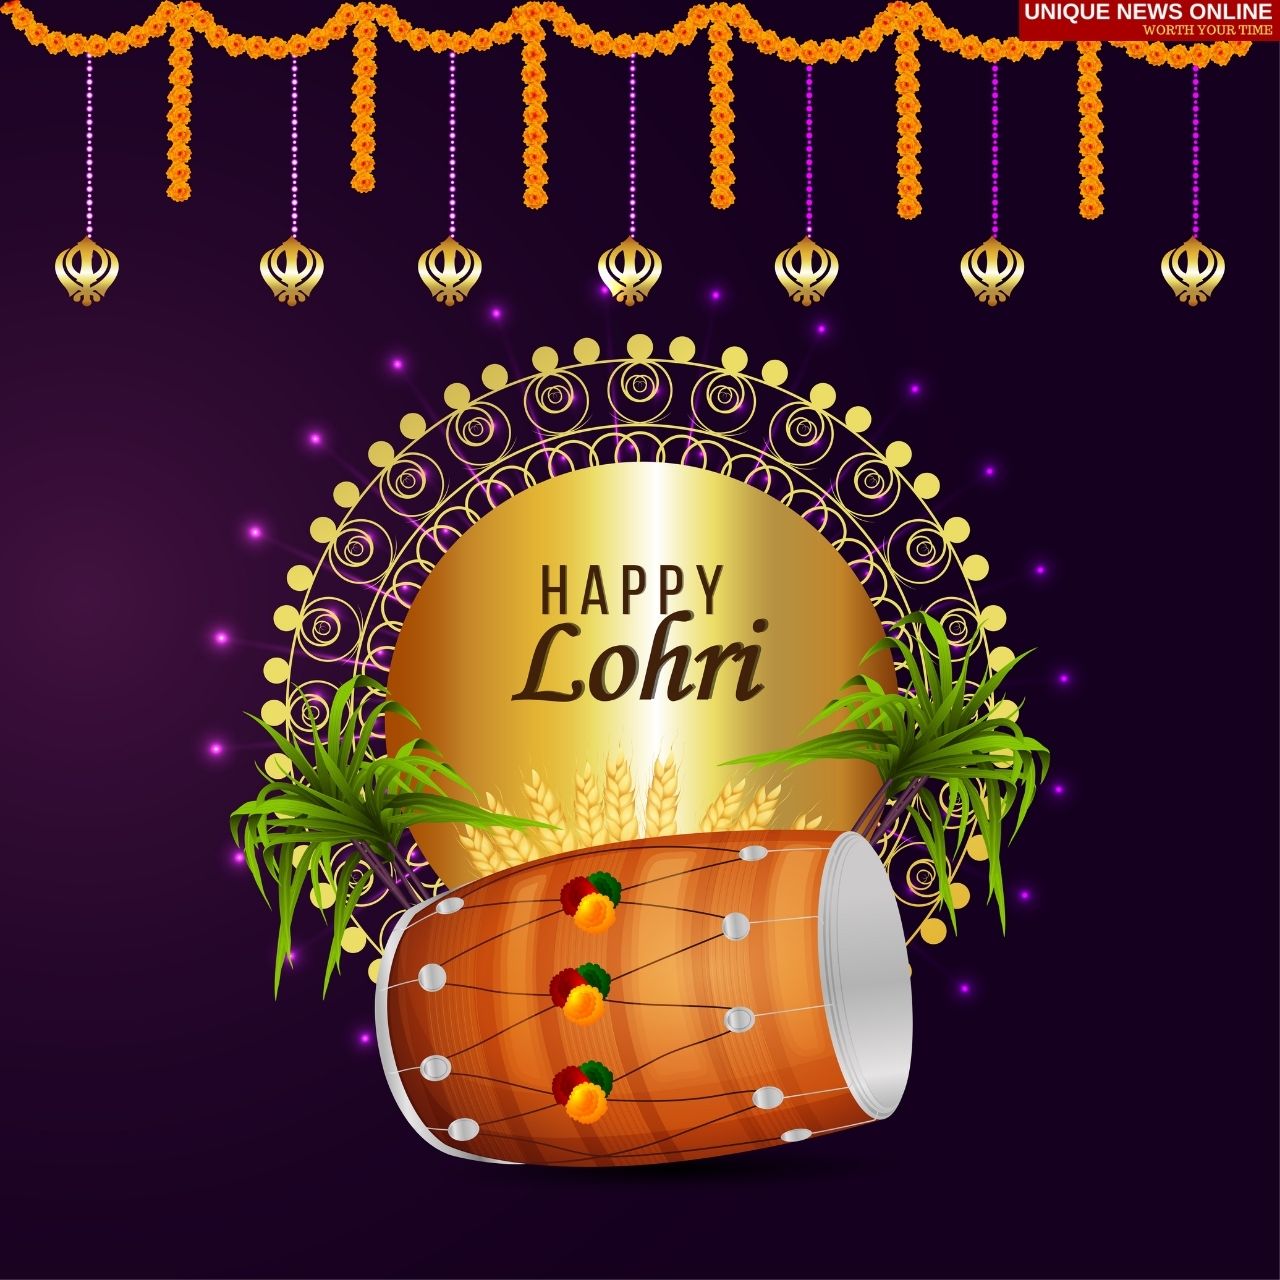 Lohri 2022 Instagram Captions, Facebook Status, WhatsApp Messages, Twitter Greetings, Wishes to Share